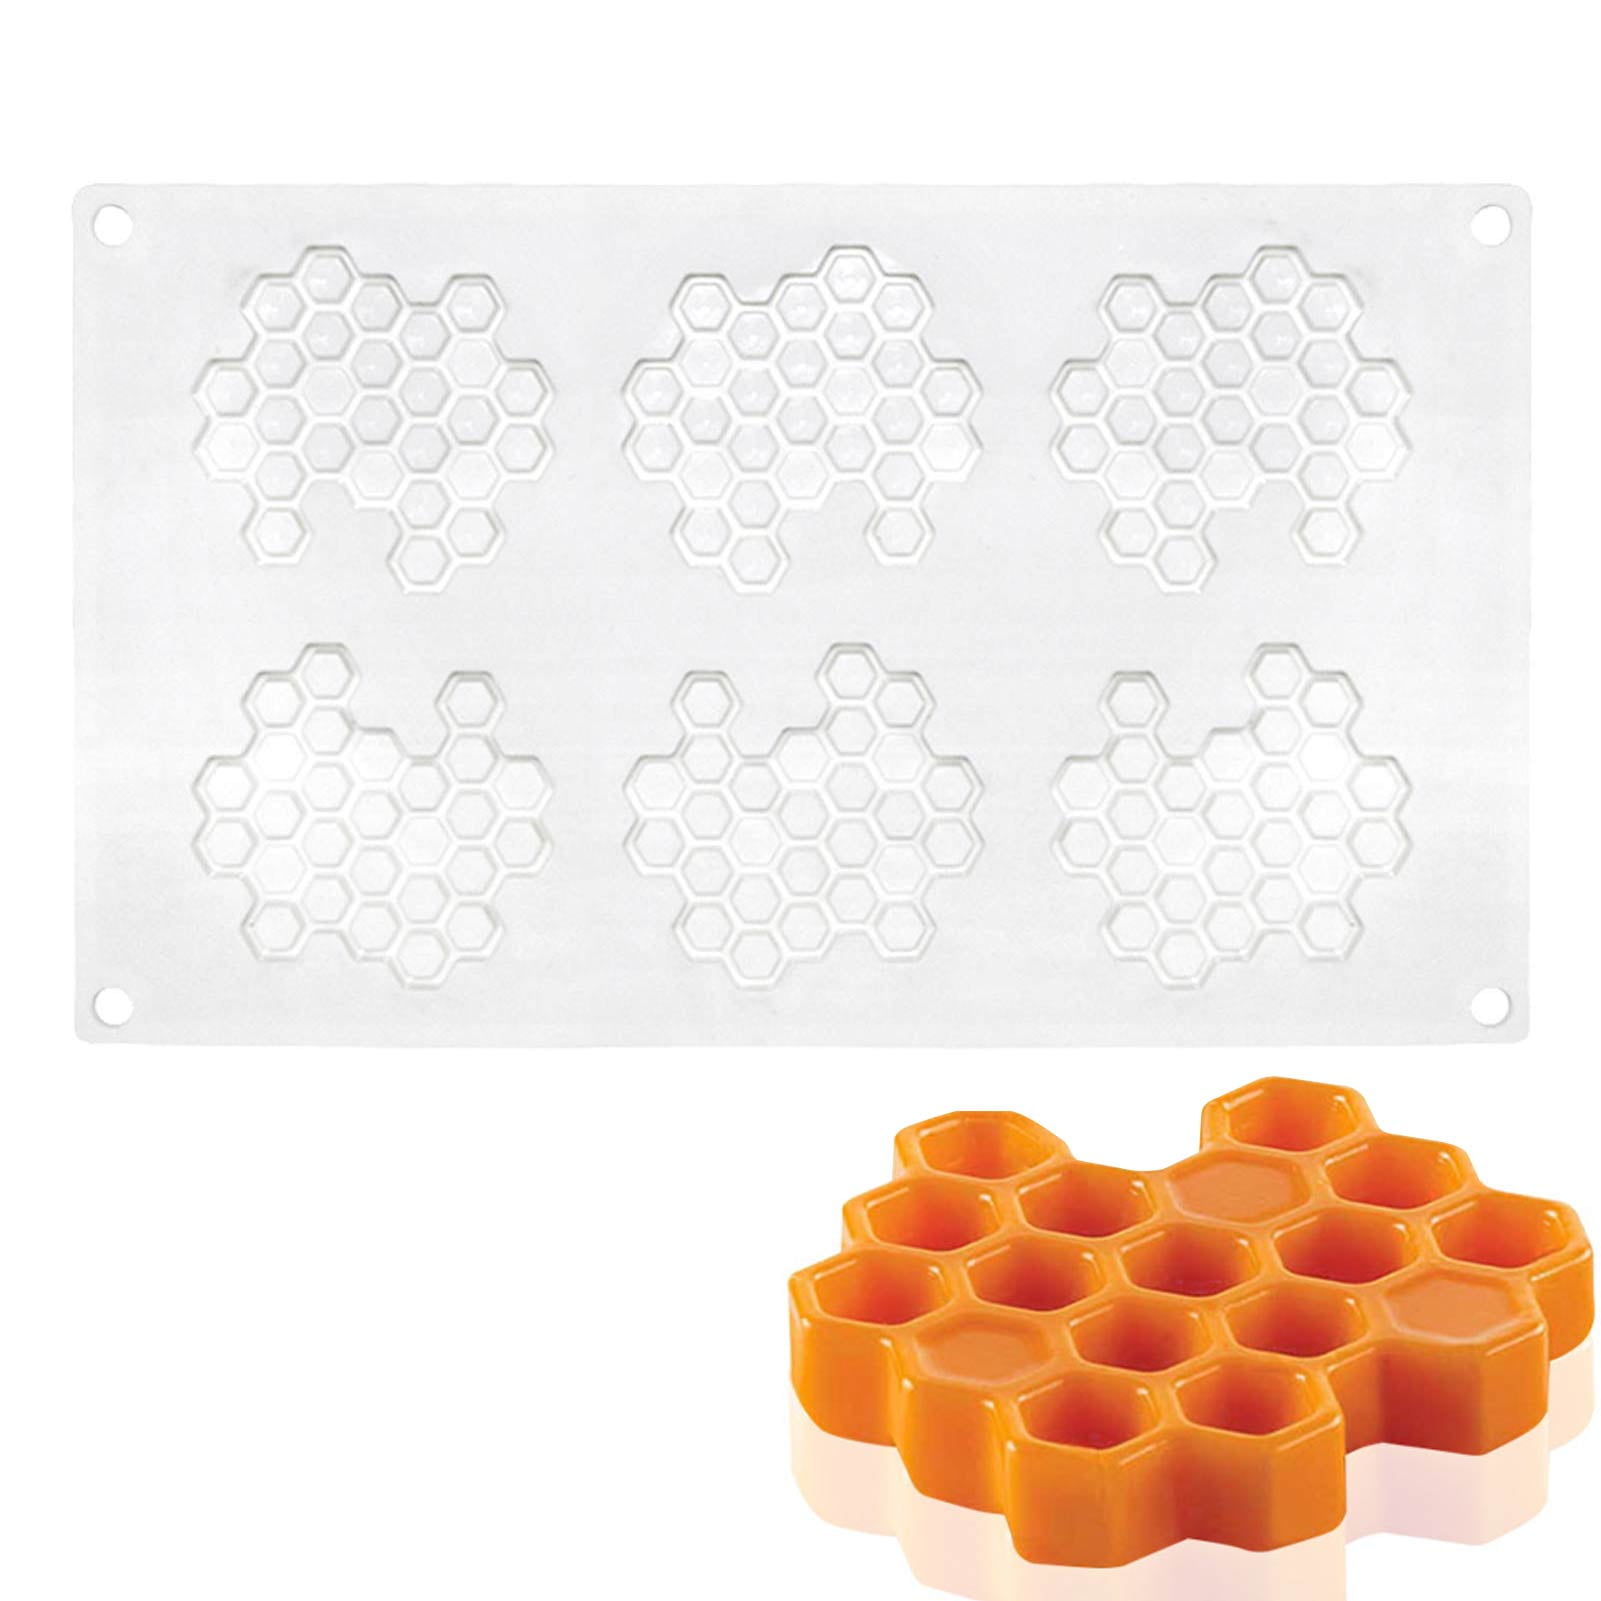 Bee Honeycomb Silicone Mold Craft DIY Soap Cake Tart Chocolate Mould Baking Tool 